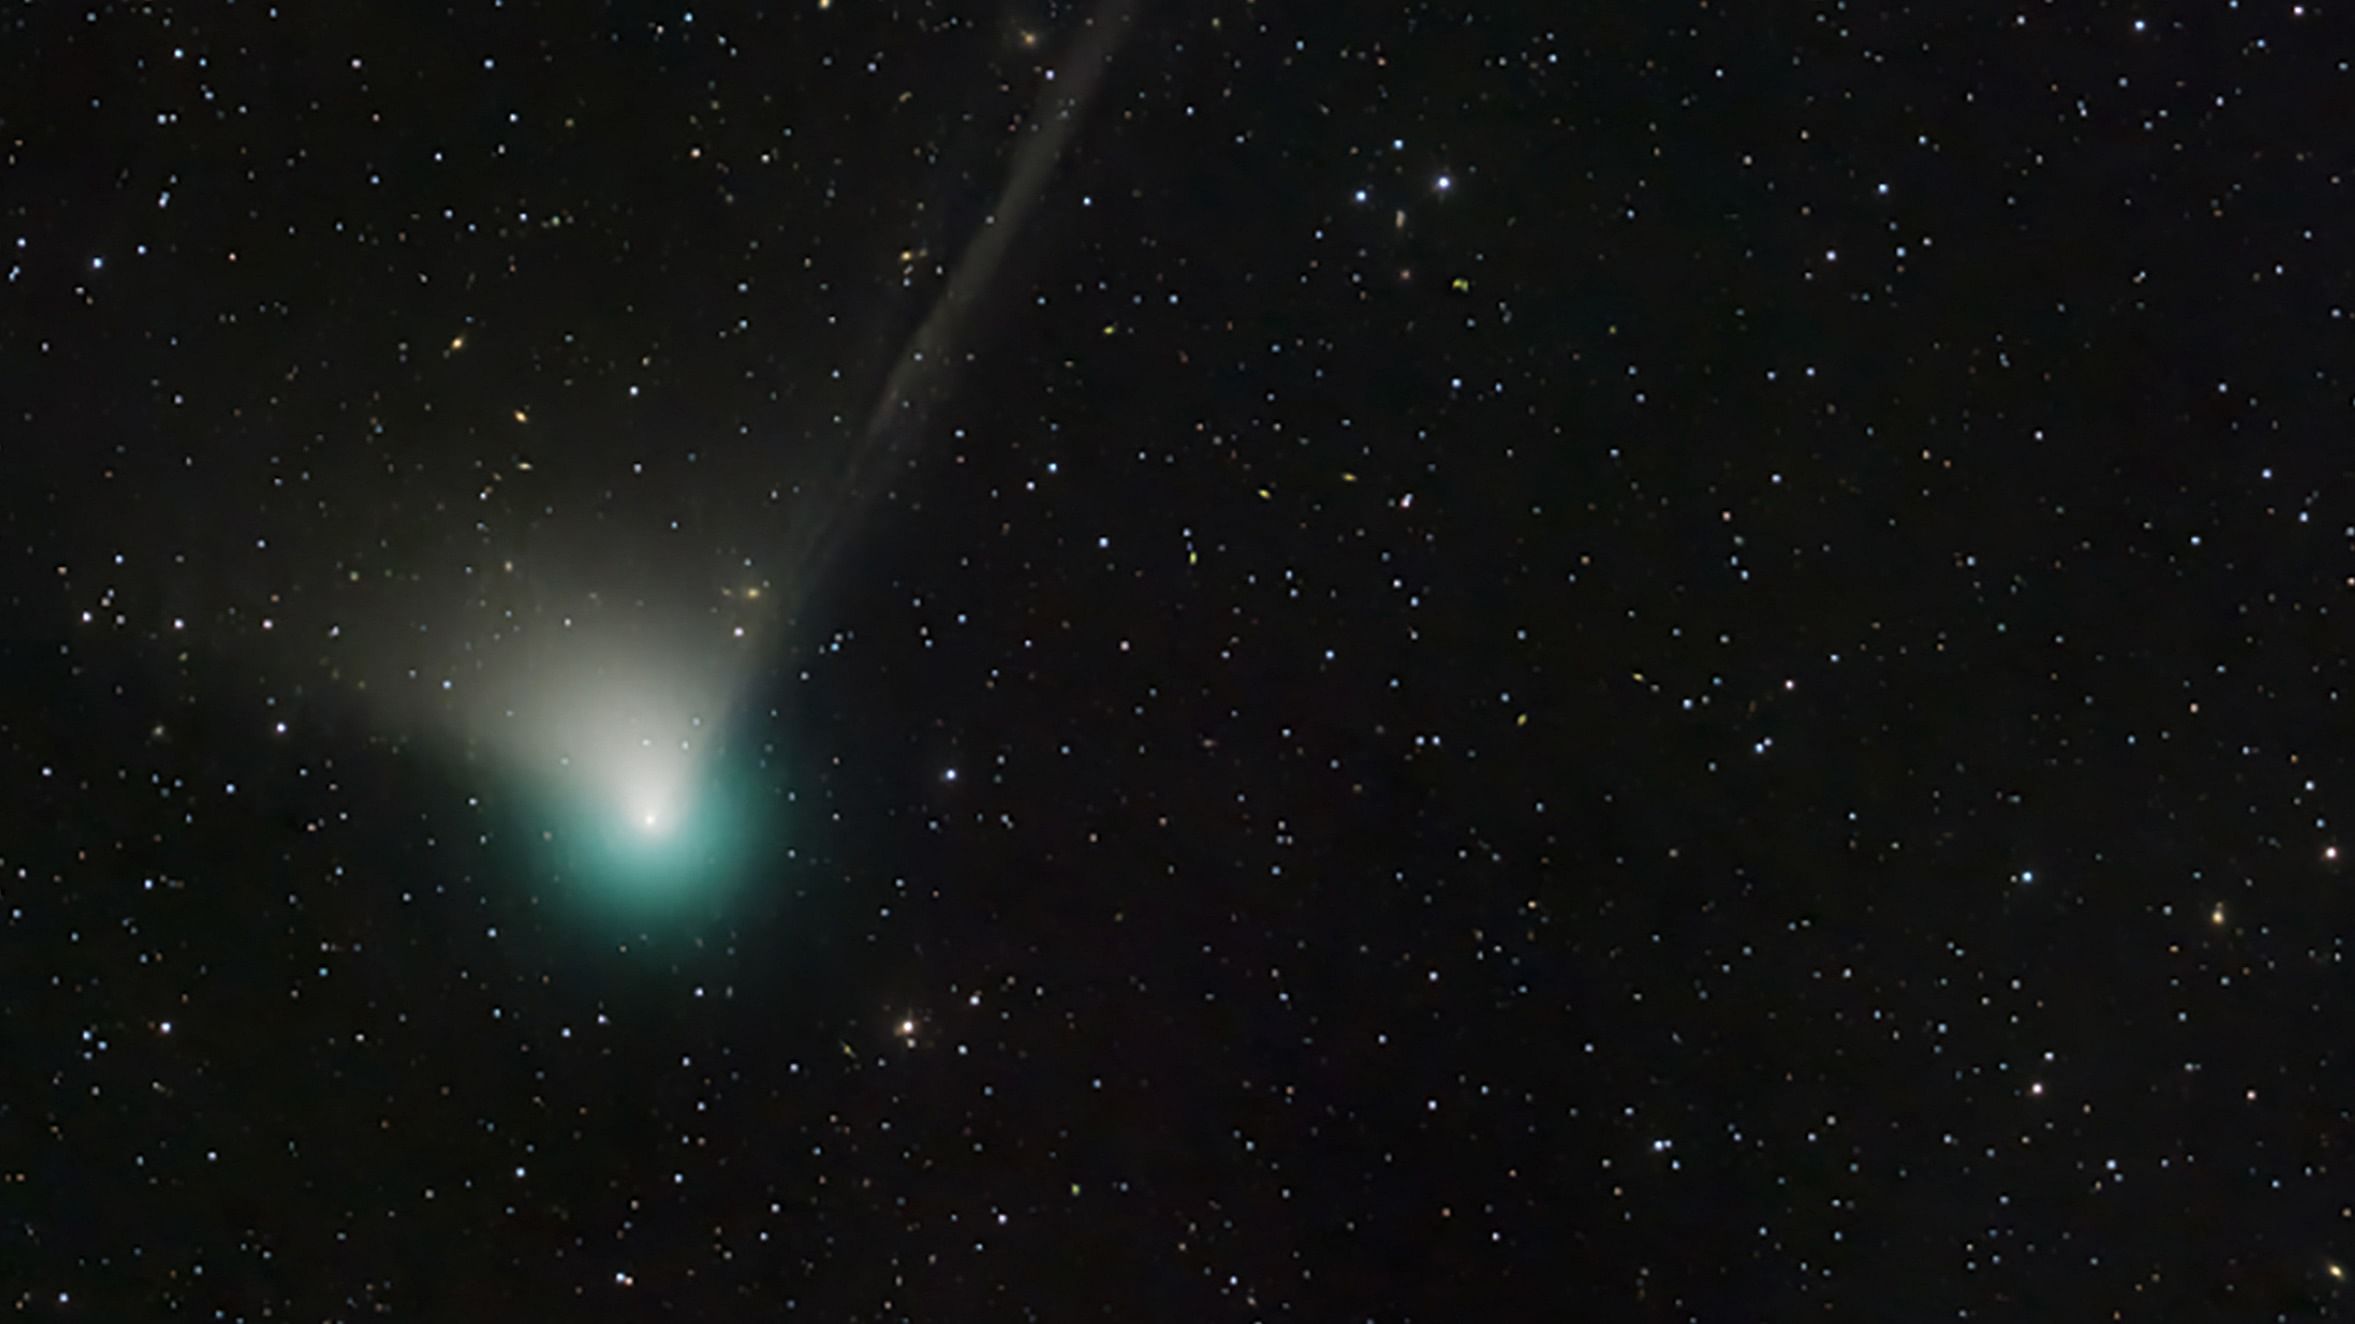 This handout picture obtained from the NASA website on January 6, 2022 shows the Comet C/2022 E3 (ZTF) that was discovered by astronomers using the wide-field survey camera at the Zwicky Transient Facility this year in early March. Credit: AFP Photo